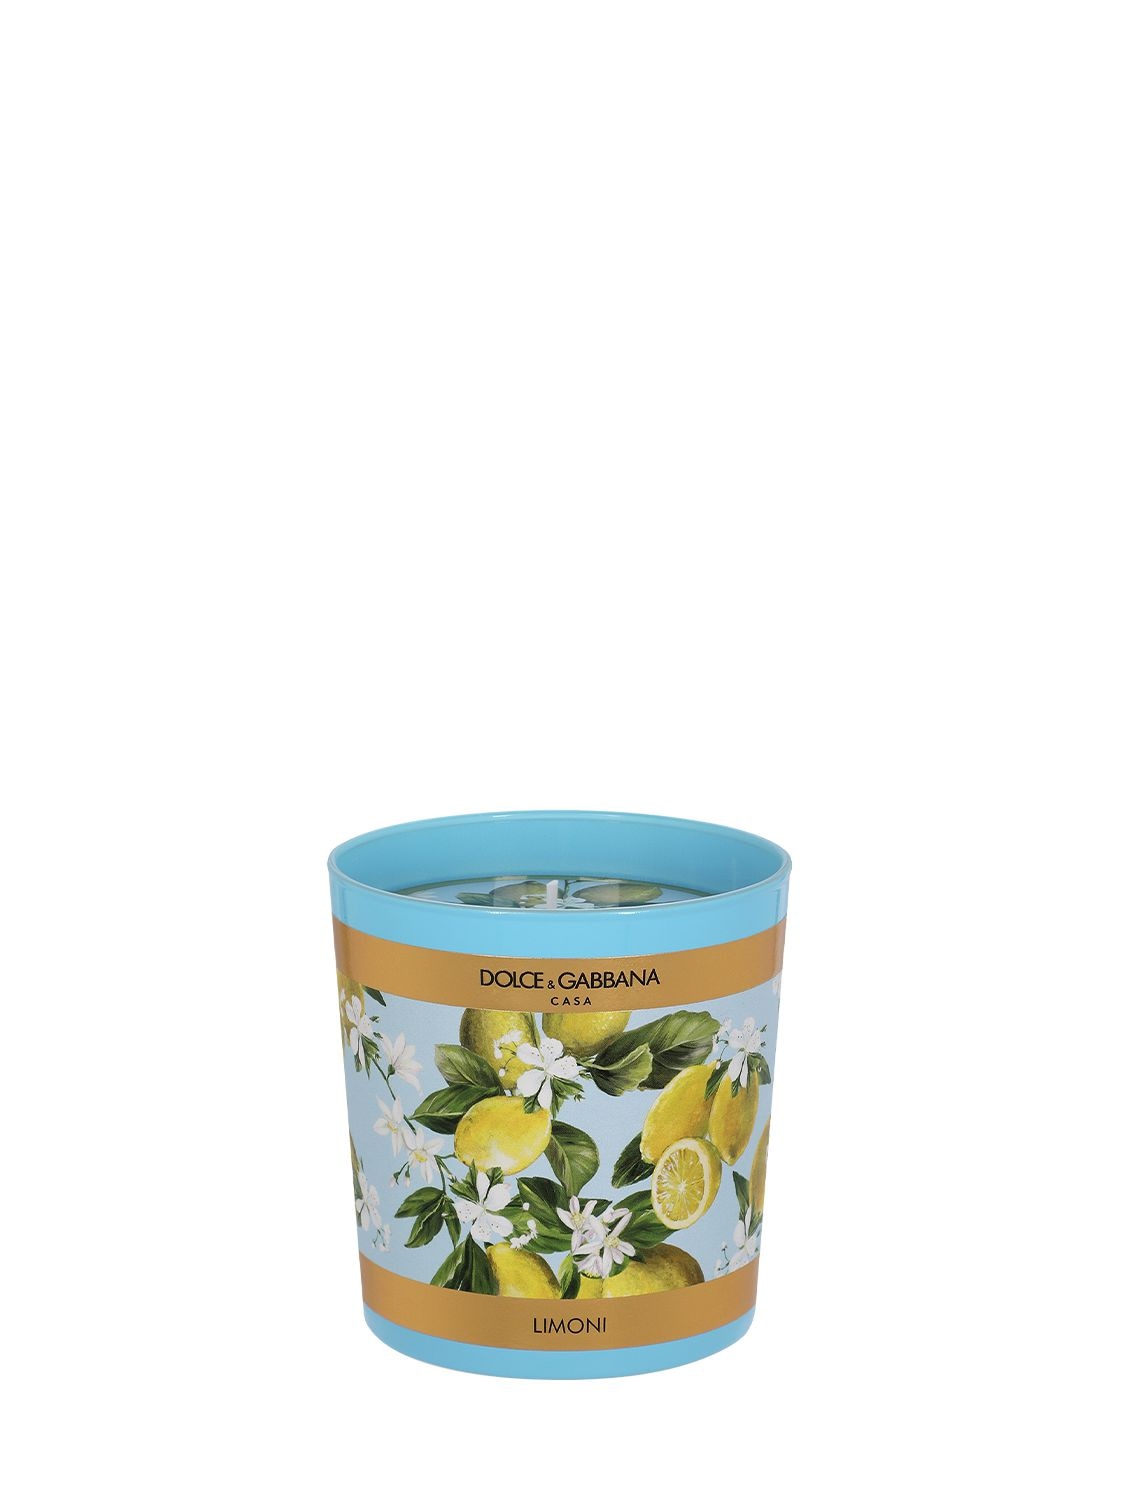 Dolce & Gabbana Lemon Scented Candle In Blue